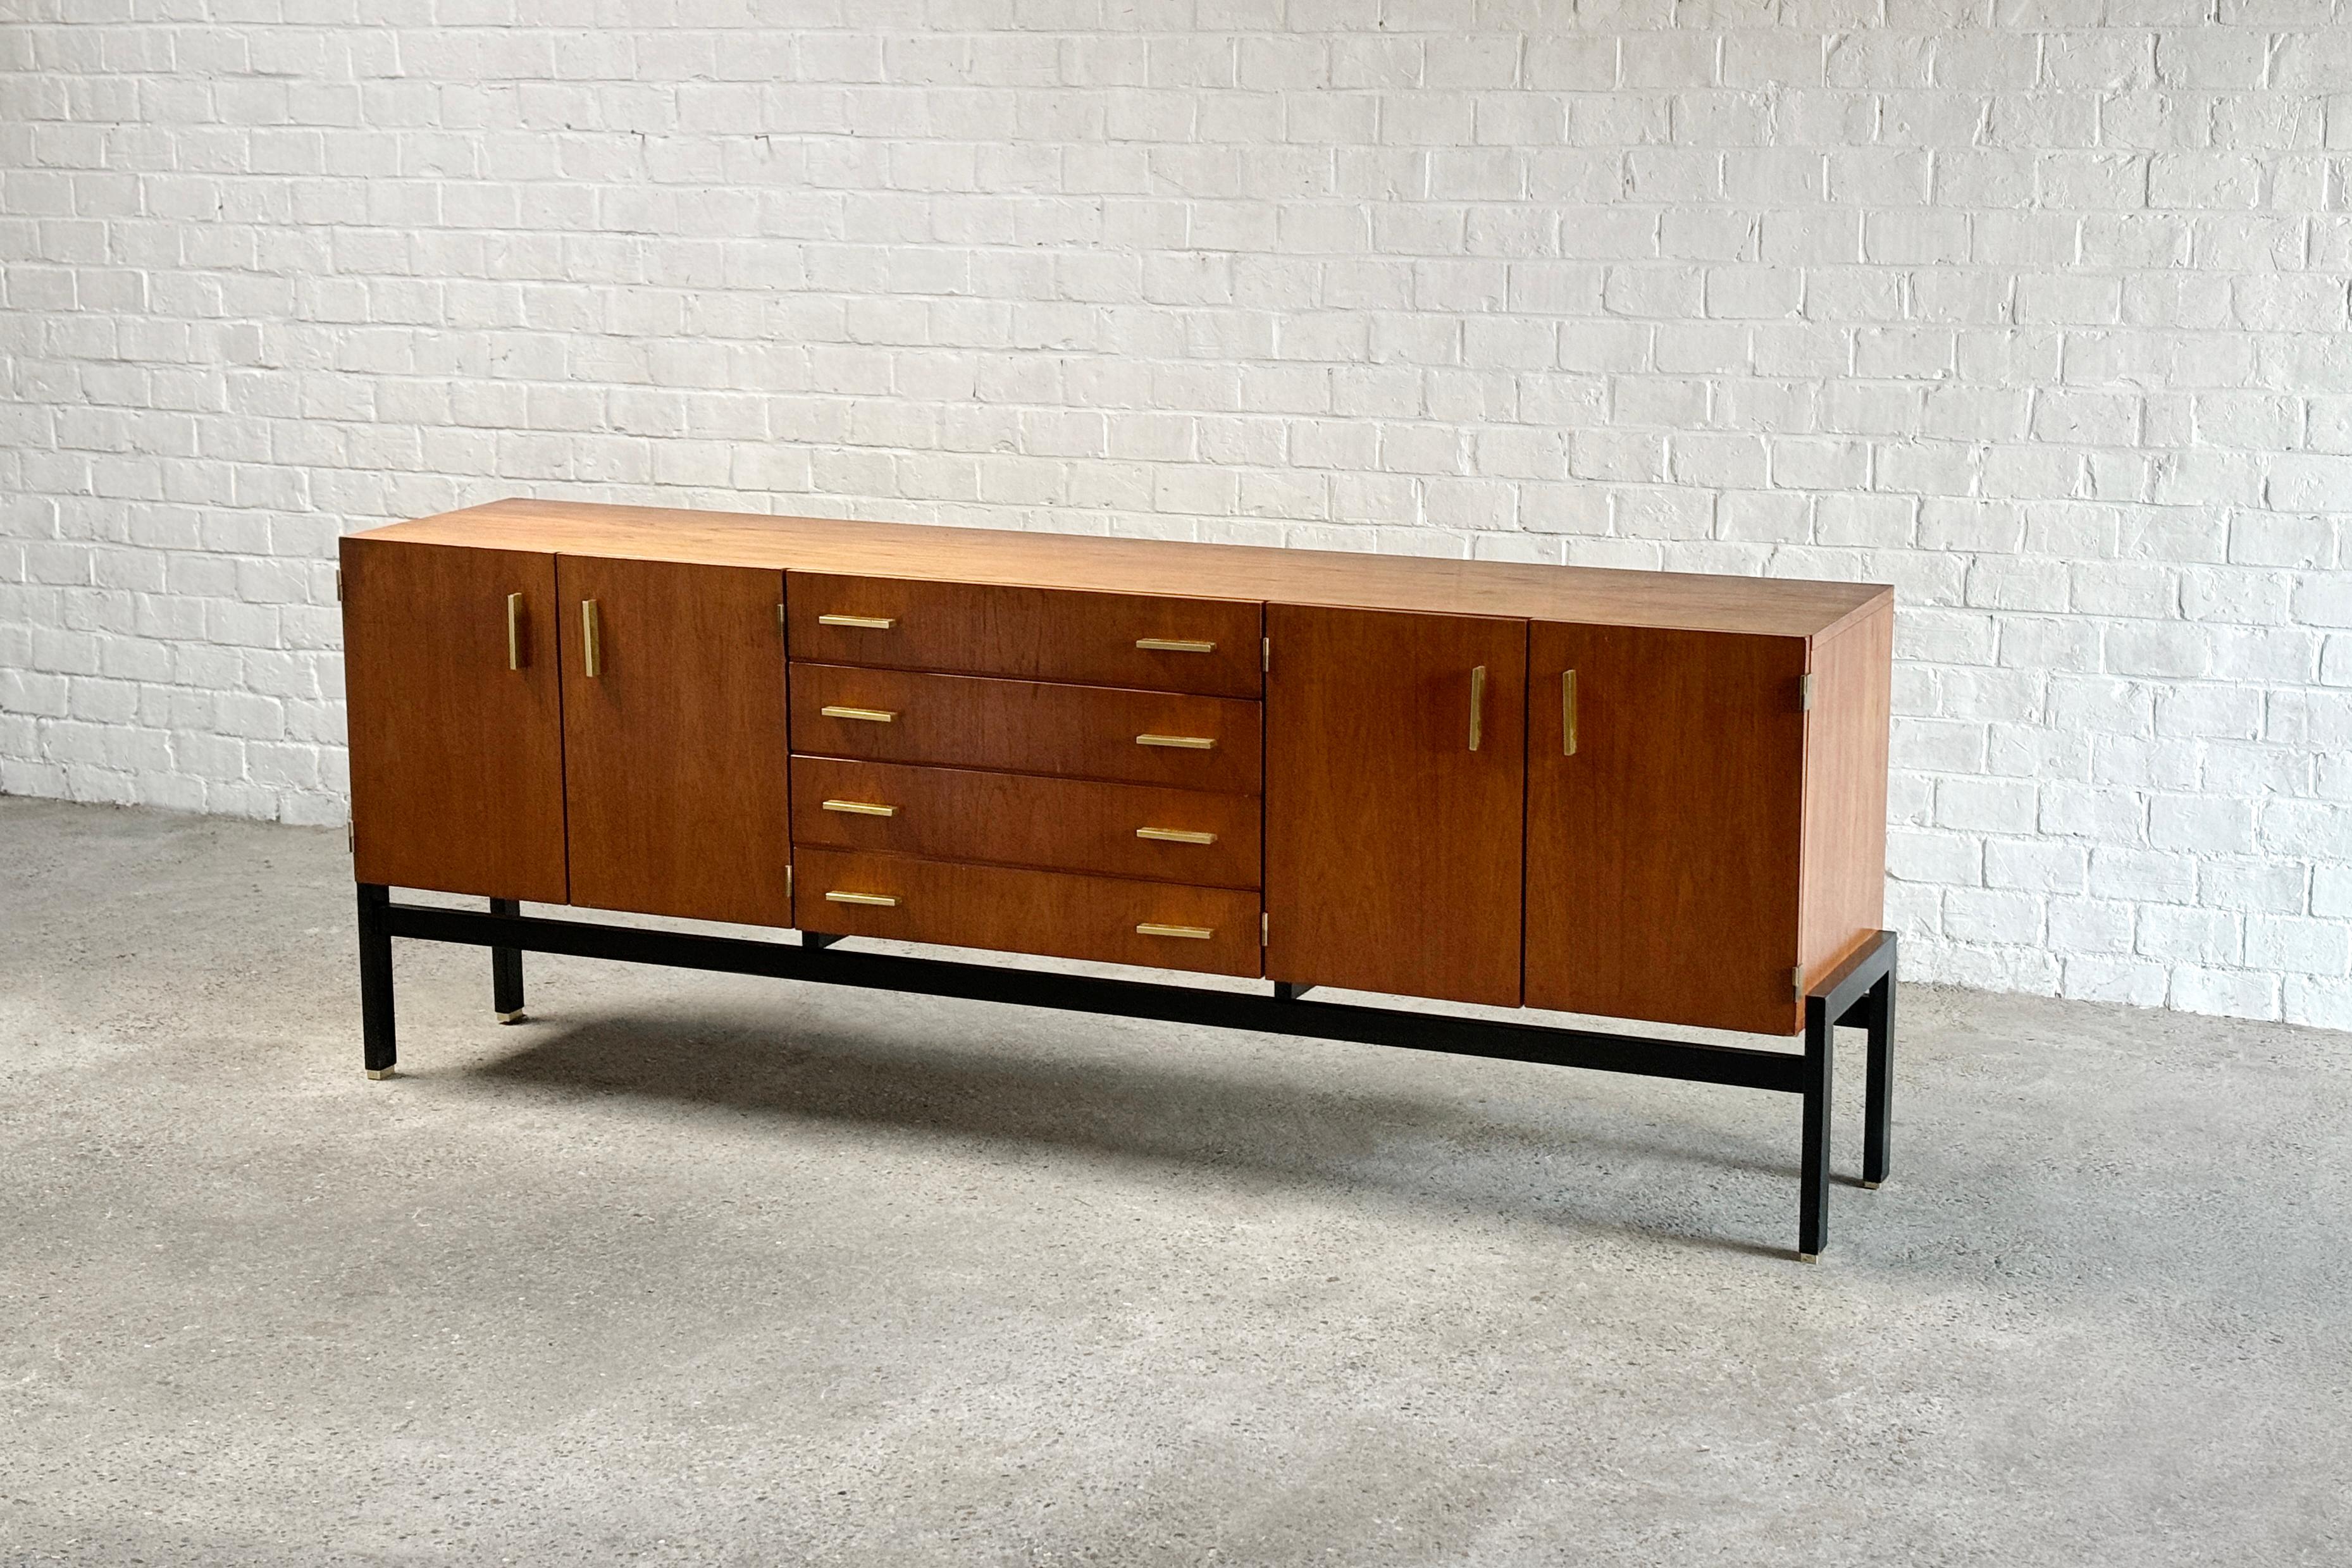 A stunning modernist french sideboard from the 1960s whose designer remains unknown. The sideboard has a teak veneer surface and features four doors and four drawers with rectangular brass handles, creating a modern look. The body rests on black